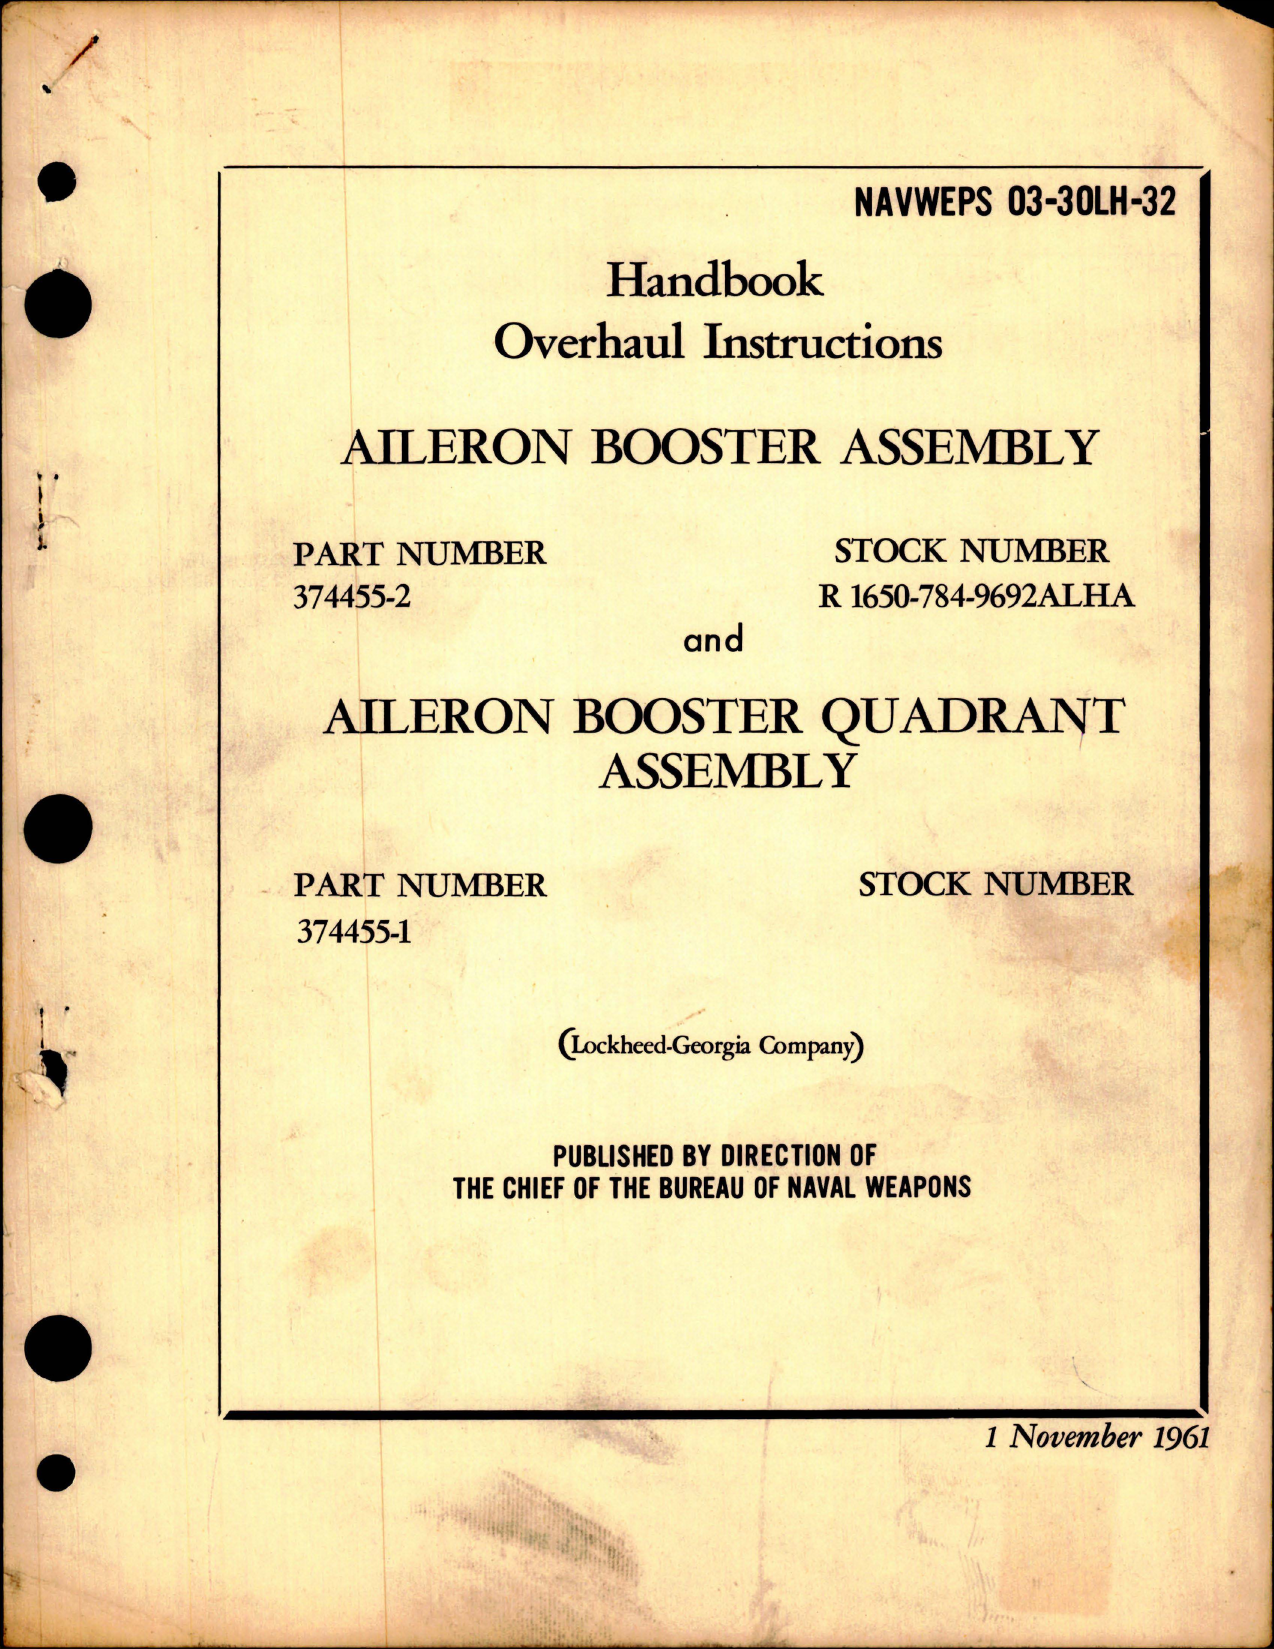 Sample page 1 from AirCorps Library document: Overhaul Instructions for Aileron Booster Assembly and Aileron Booster Quadrant Assembly